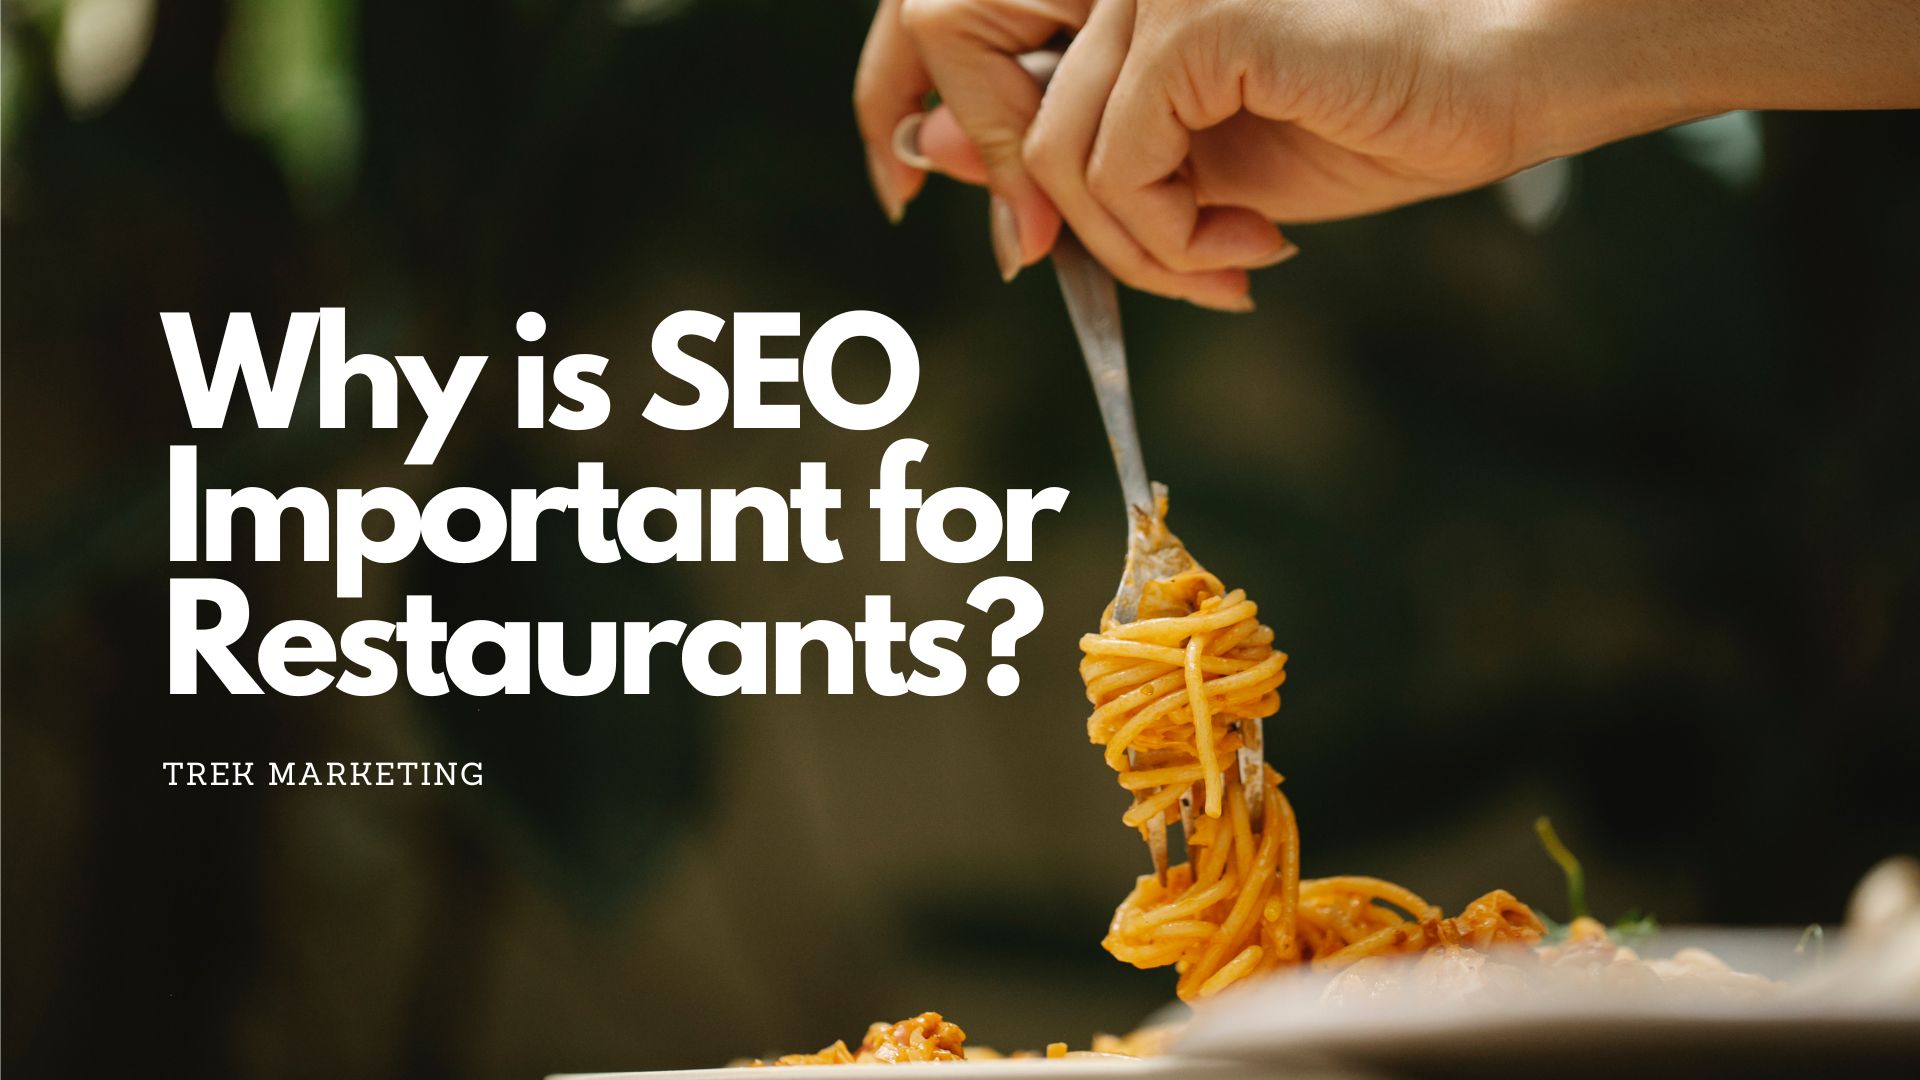 Why is SEO Important for Restaurants